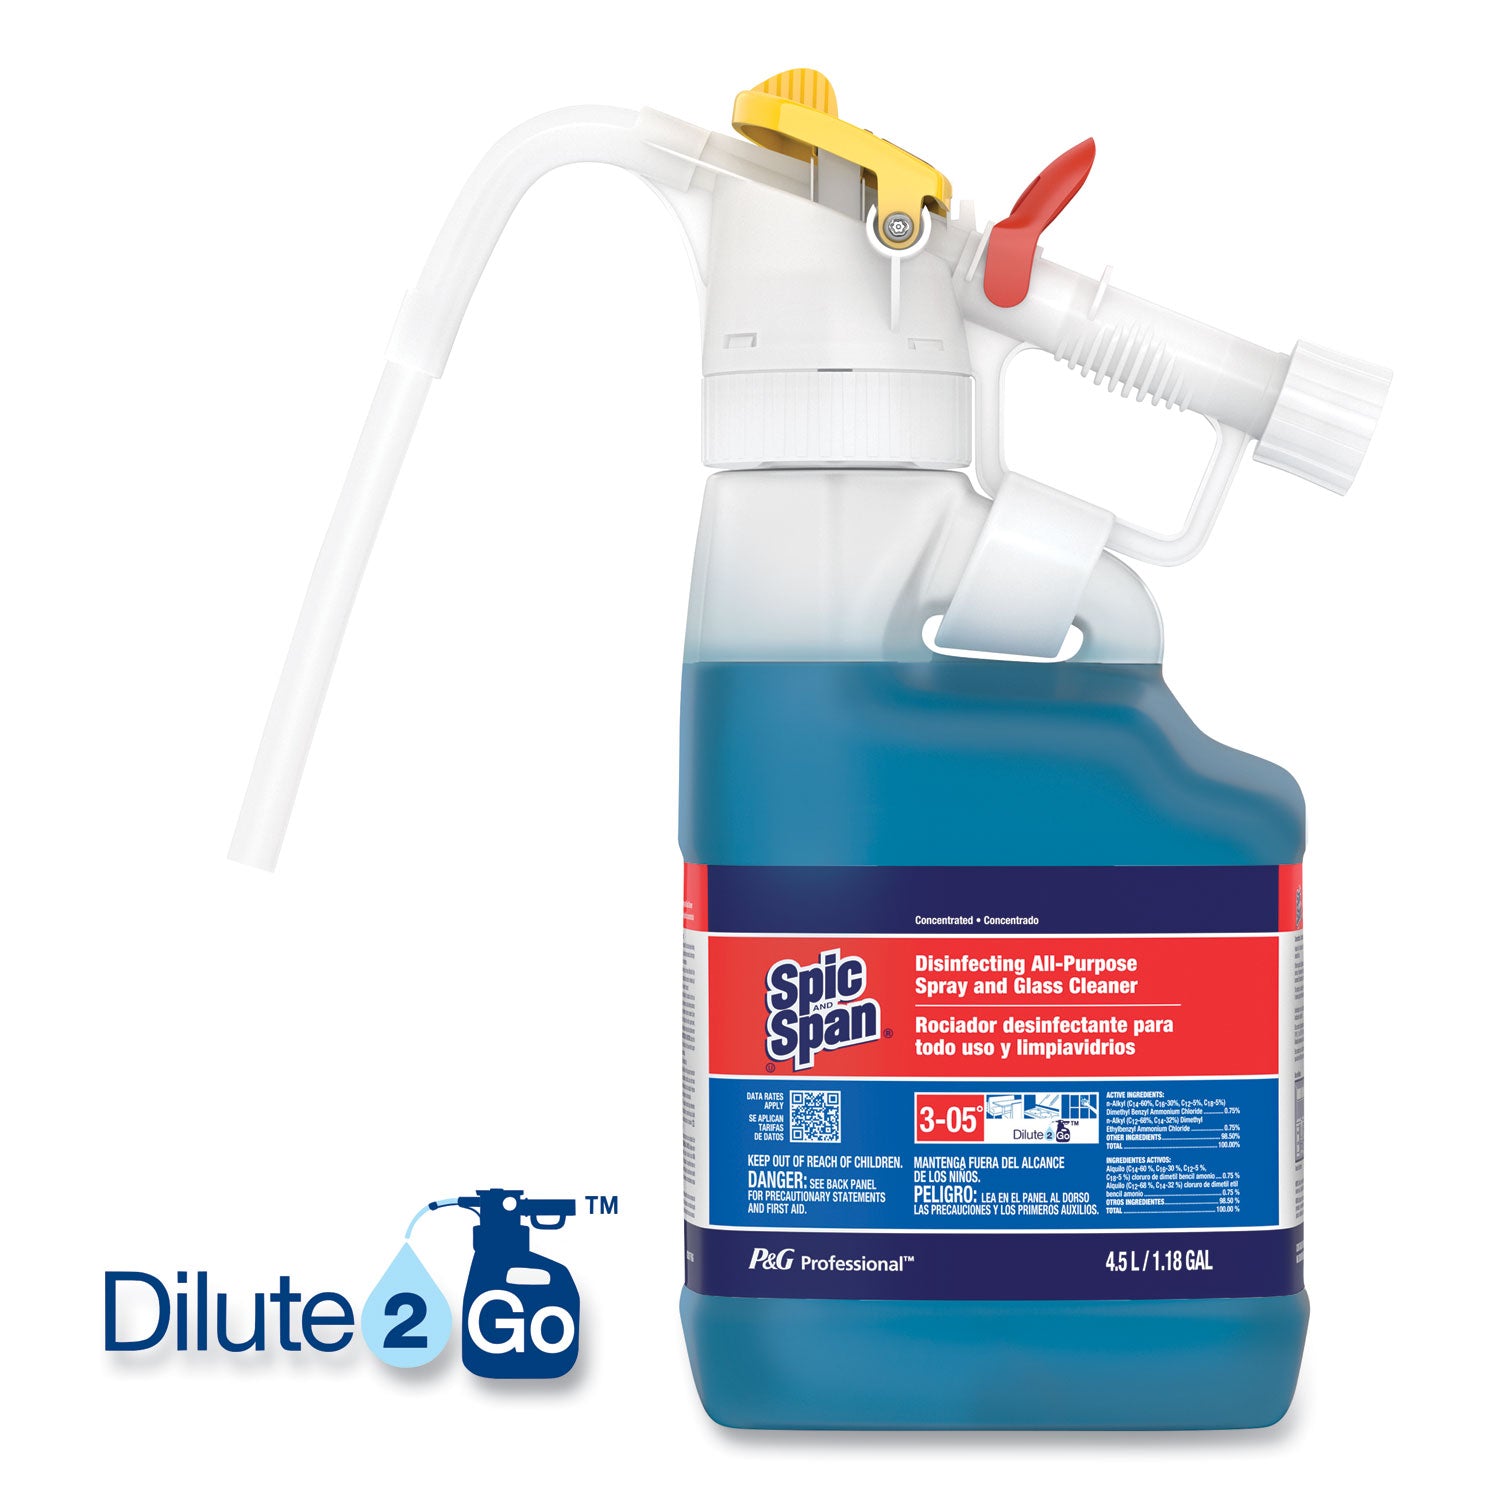 dilute-2-go-spic-and-span-disinfecting-all-purpose-spray-and-glass-cleaner-fresh-scent-45-l-jug-1-carton_pgc72001 - 2